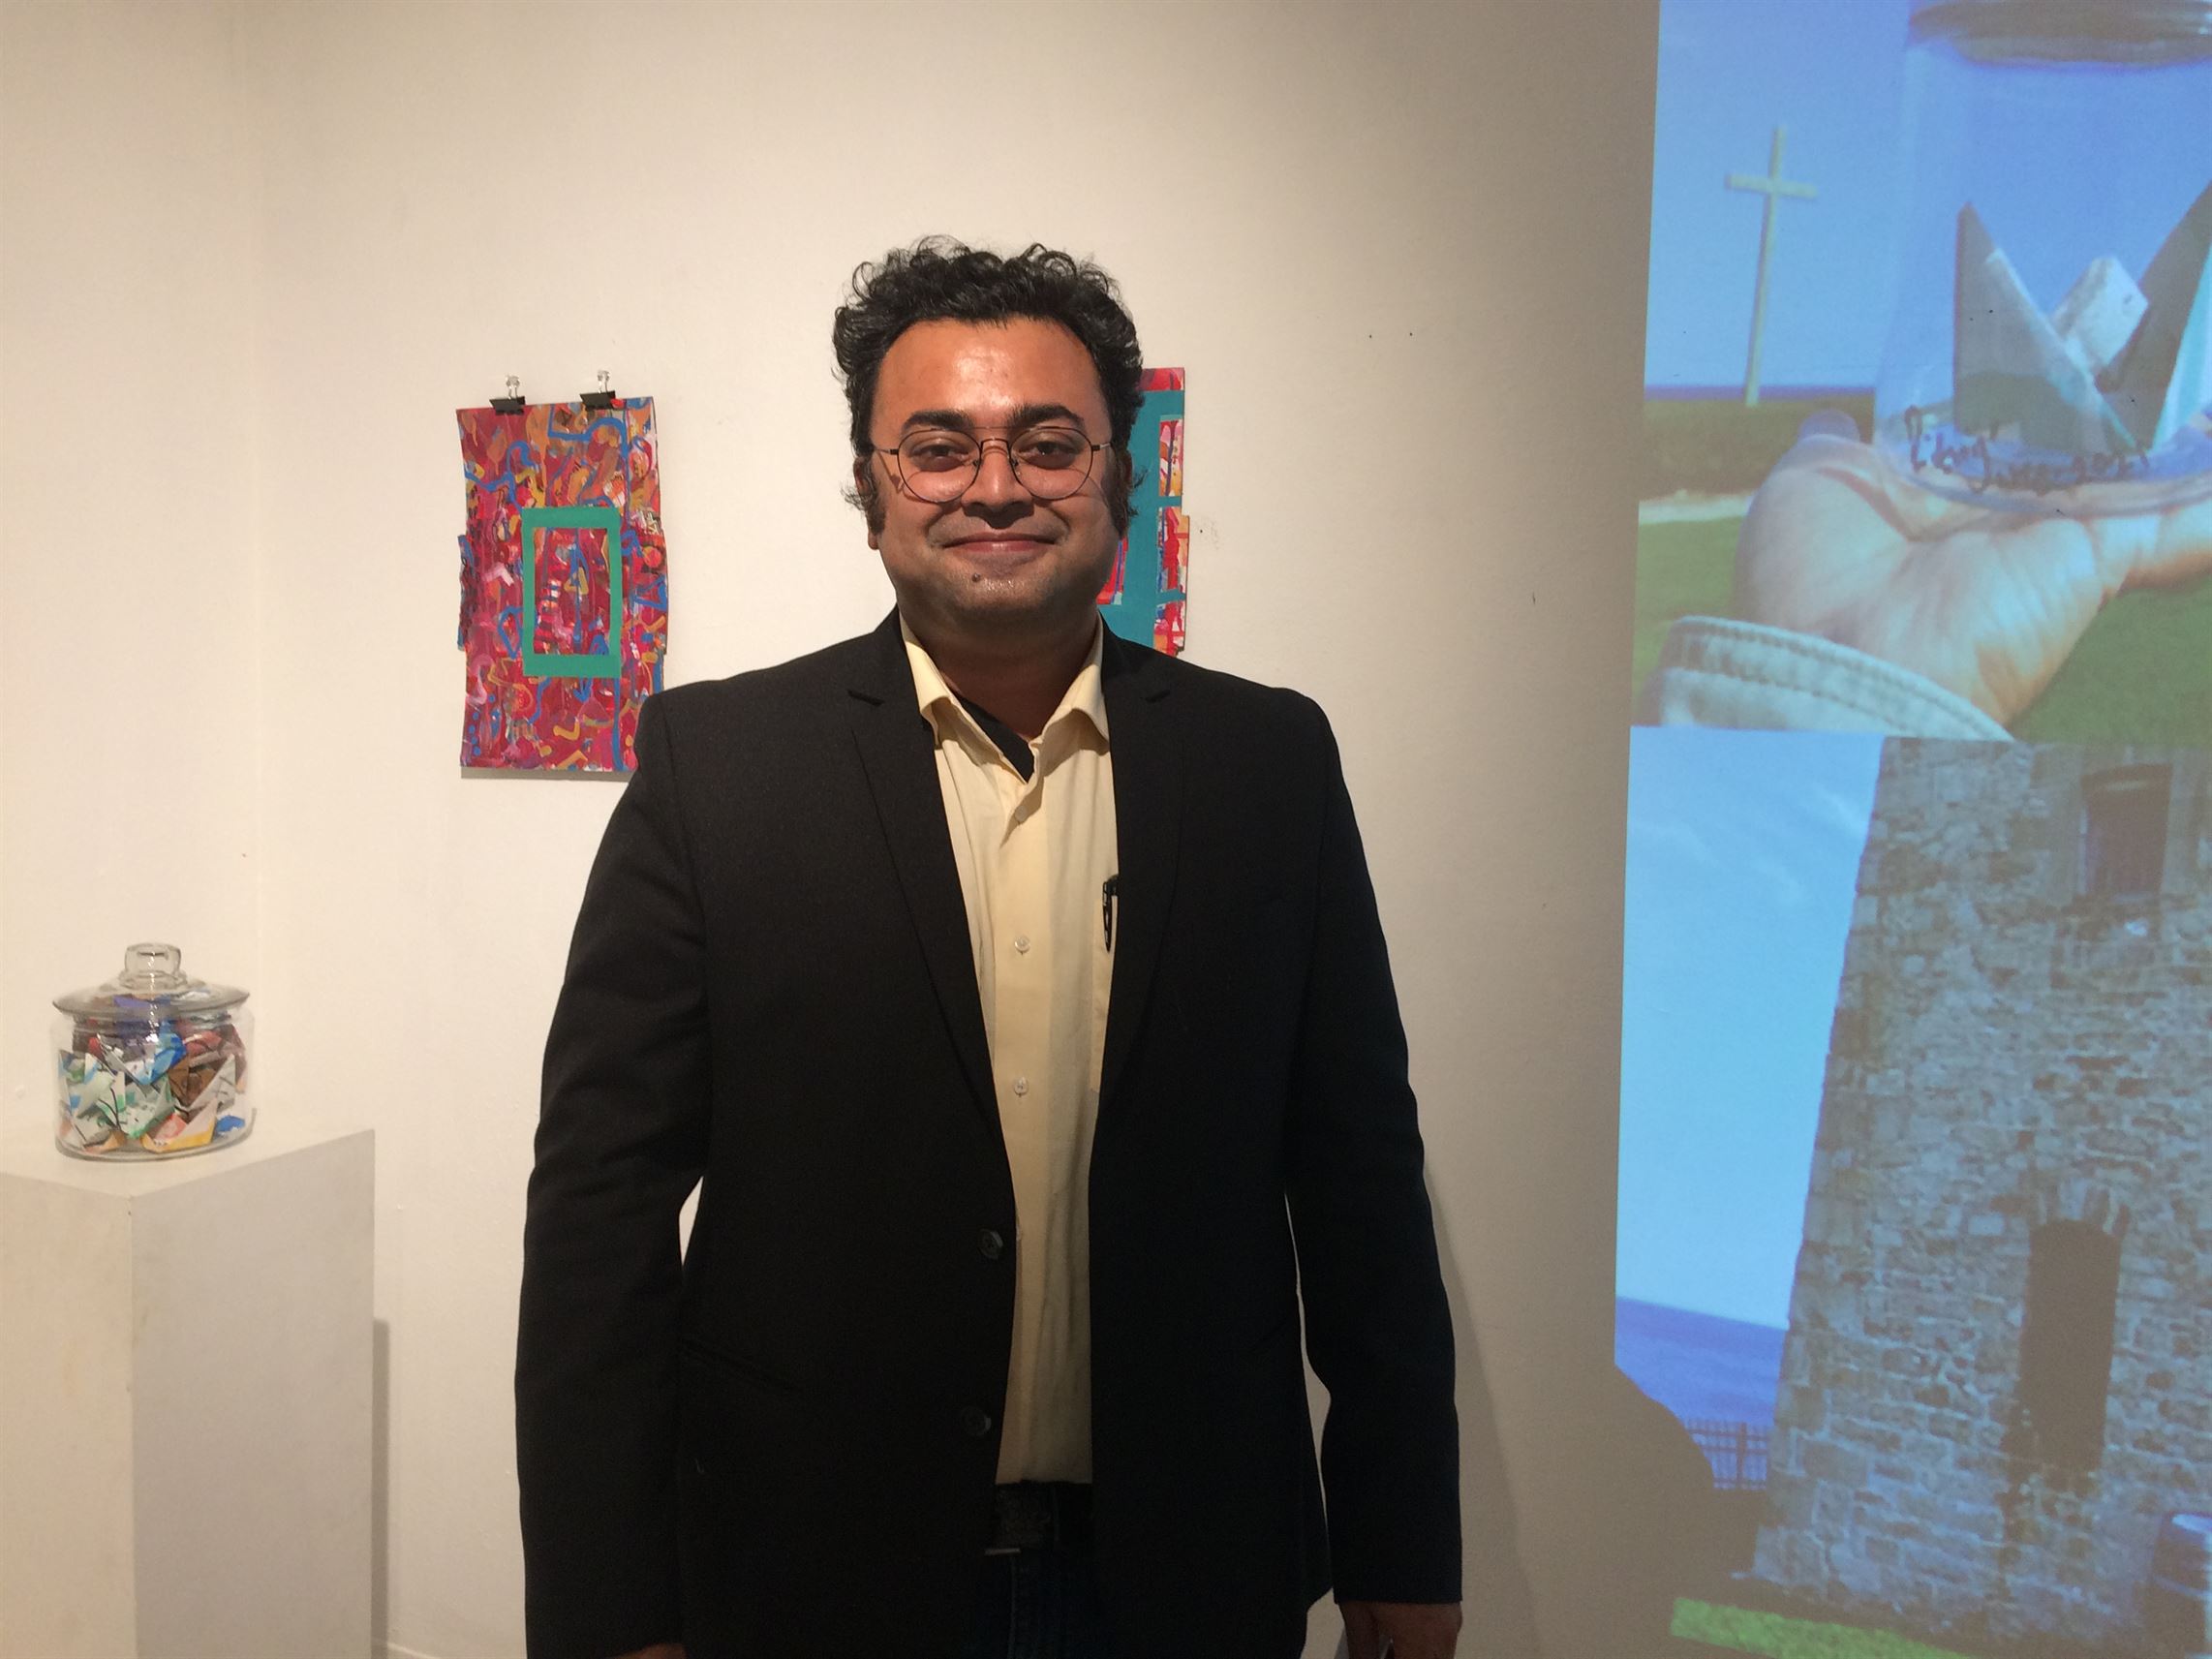 Dr. Ritwij Bhowmik, who was a visiting professor for the Department of Art and Design, completed an art experiment to spread a message about spreading art through unconventional means and his view on racial profiling as someone from outside the U.S. Sal DiMaggio | The Montclarion